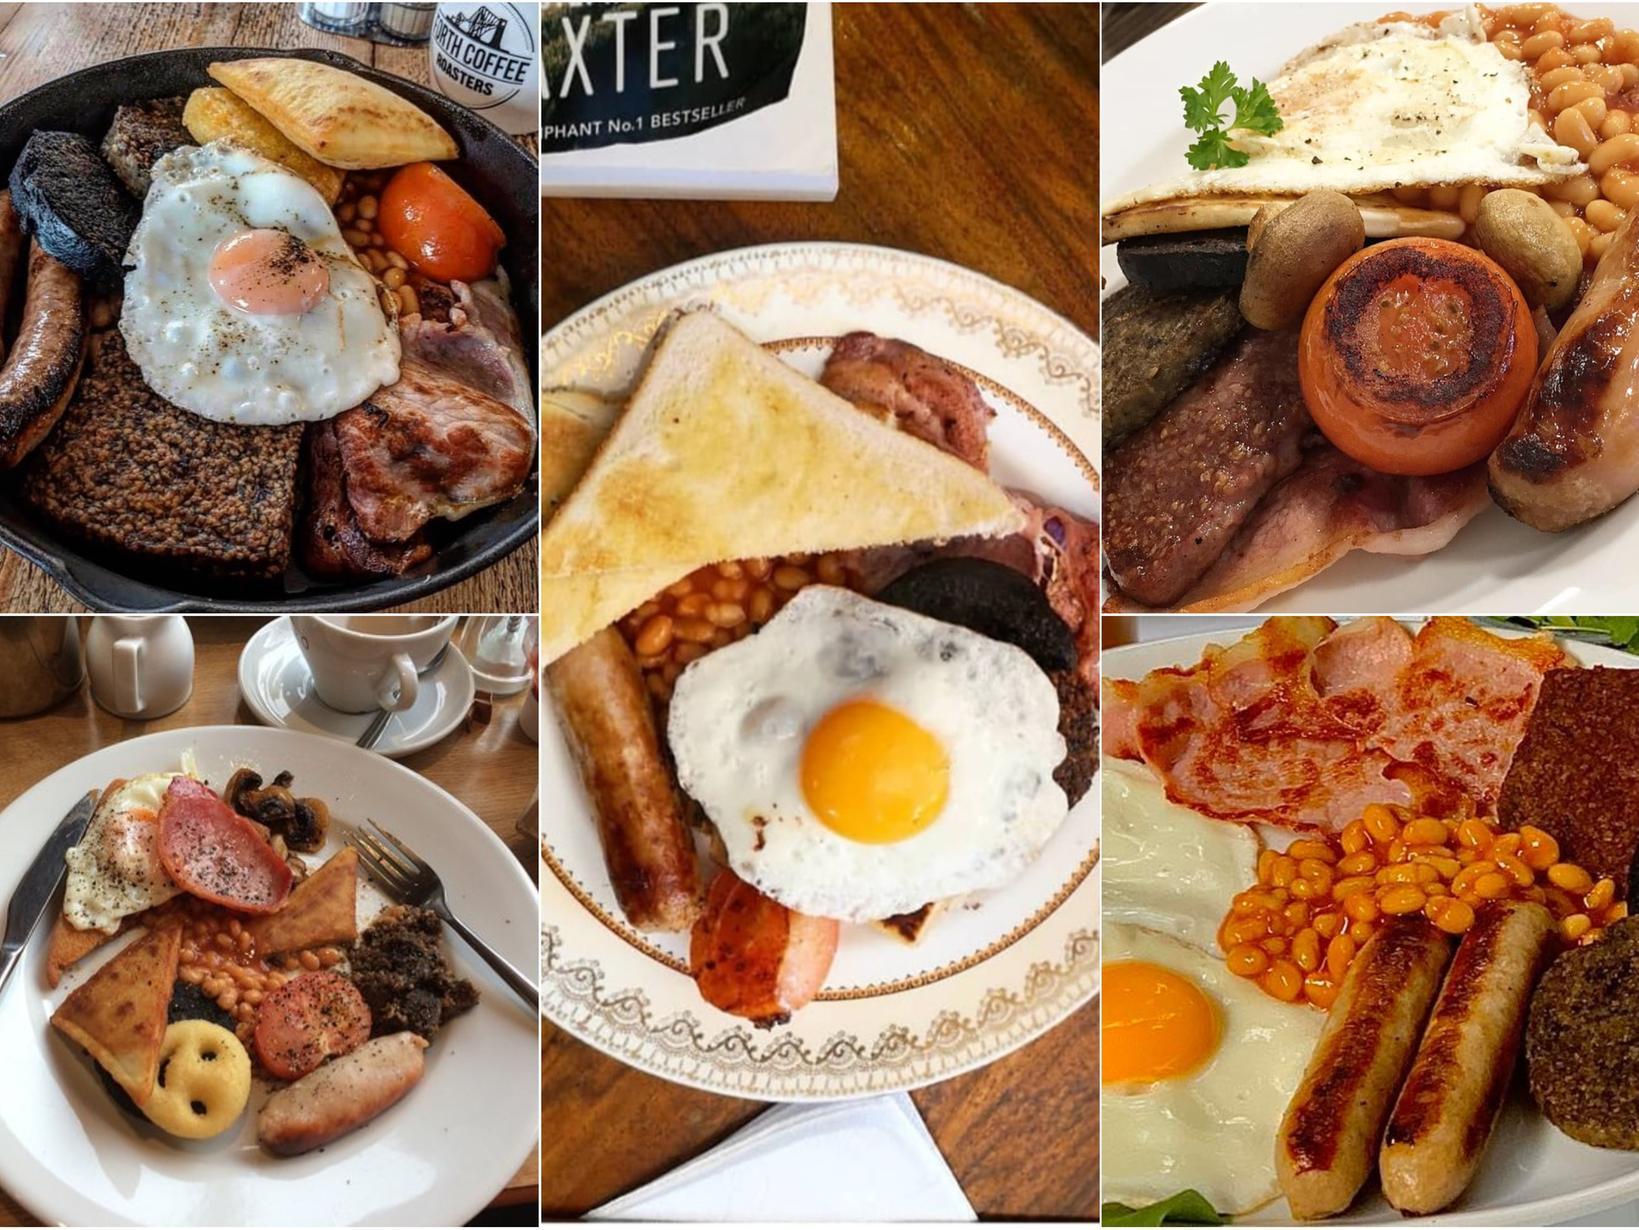 'Bangin' Breakfast' - The five best places in Edinburgh for fry-up